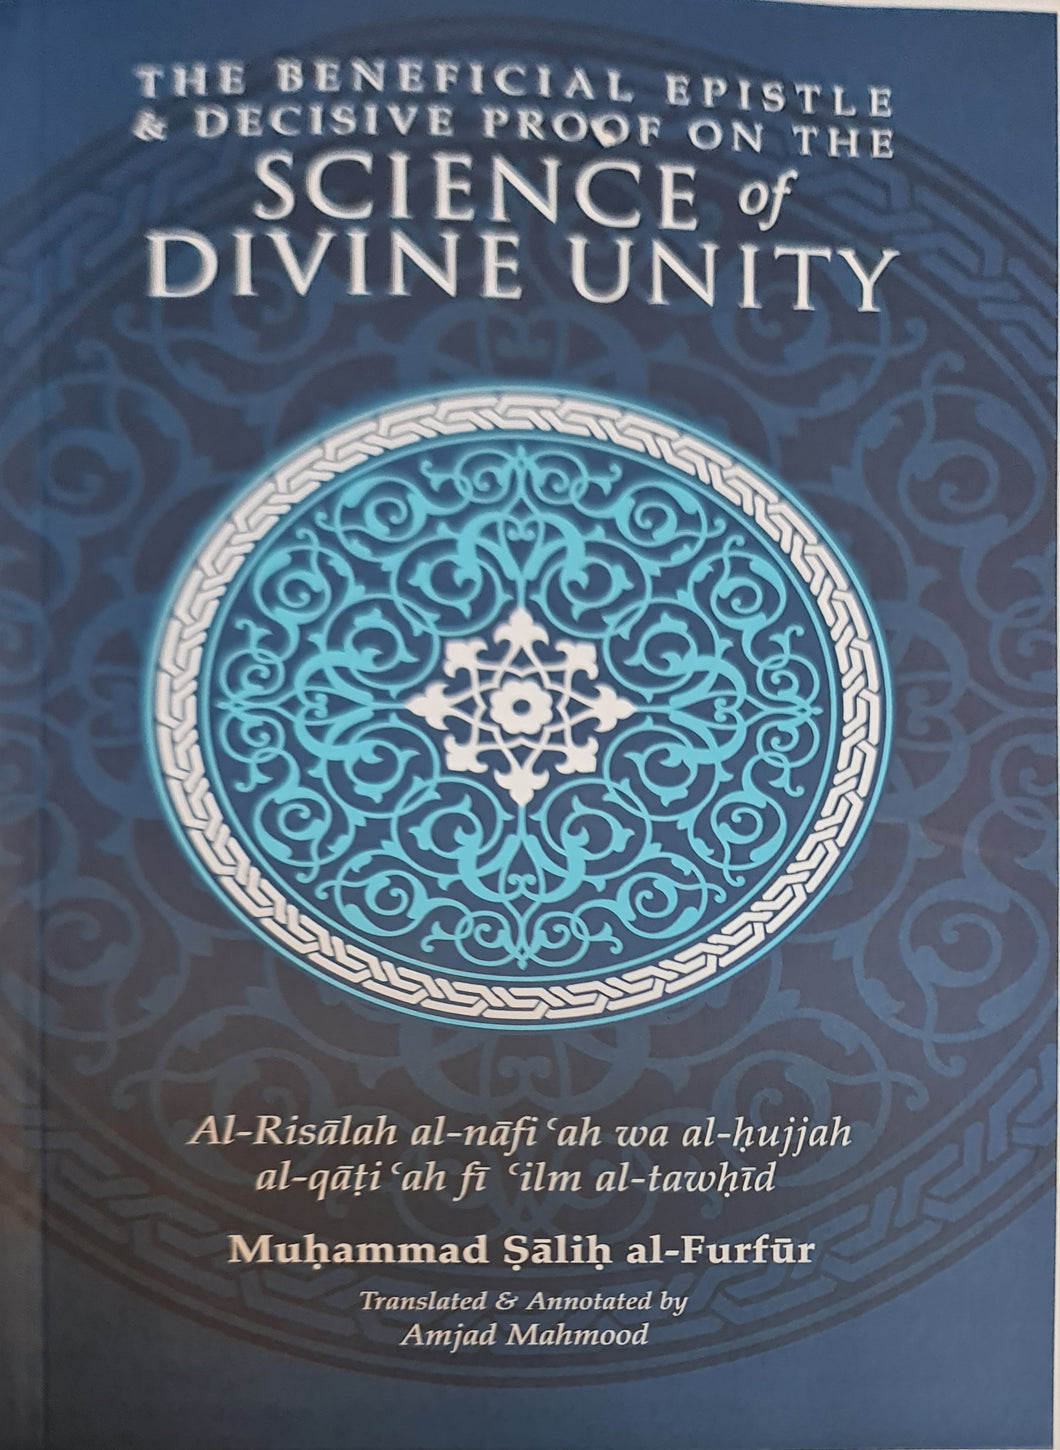 THE BENEFICIAL EPISTLE & DECISIVE PROOF ON THE SCIENCE OF DIVINE UNITY